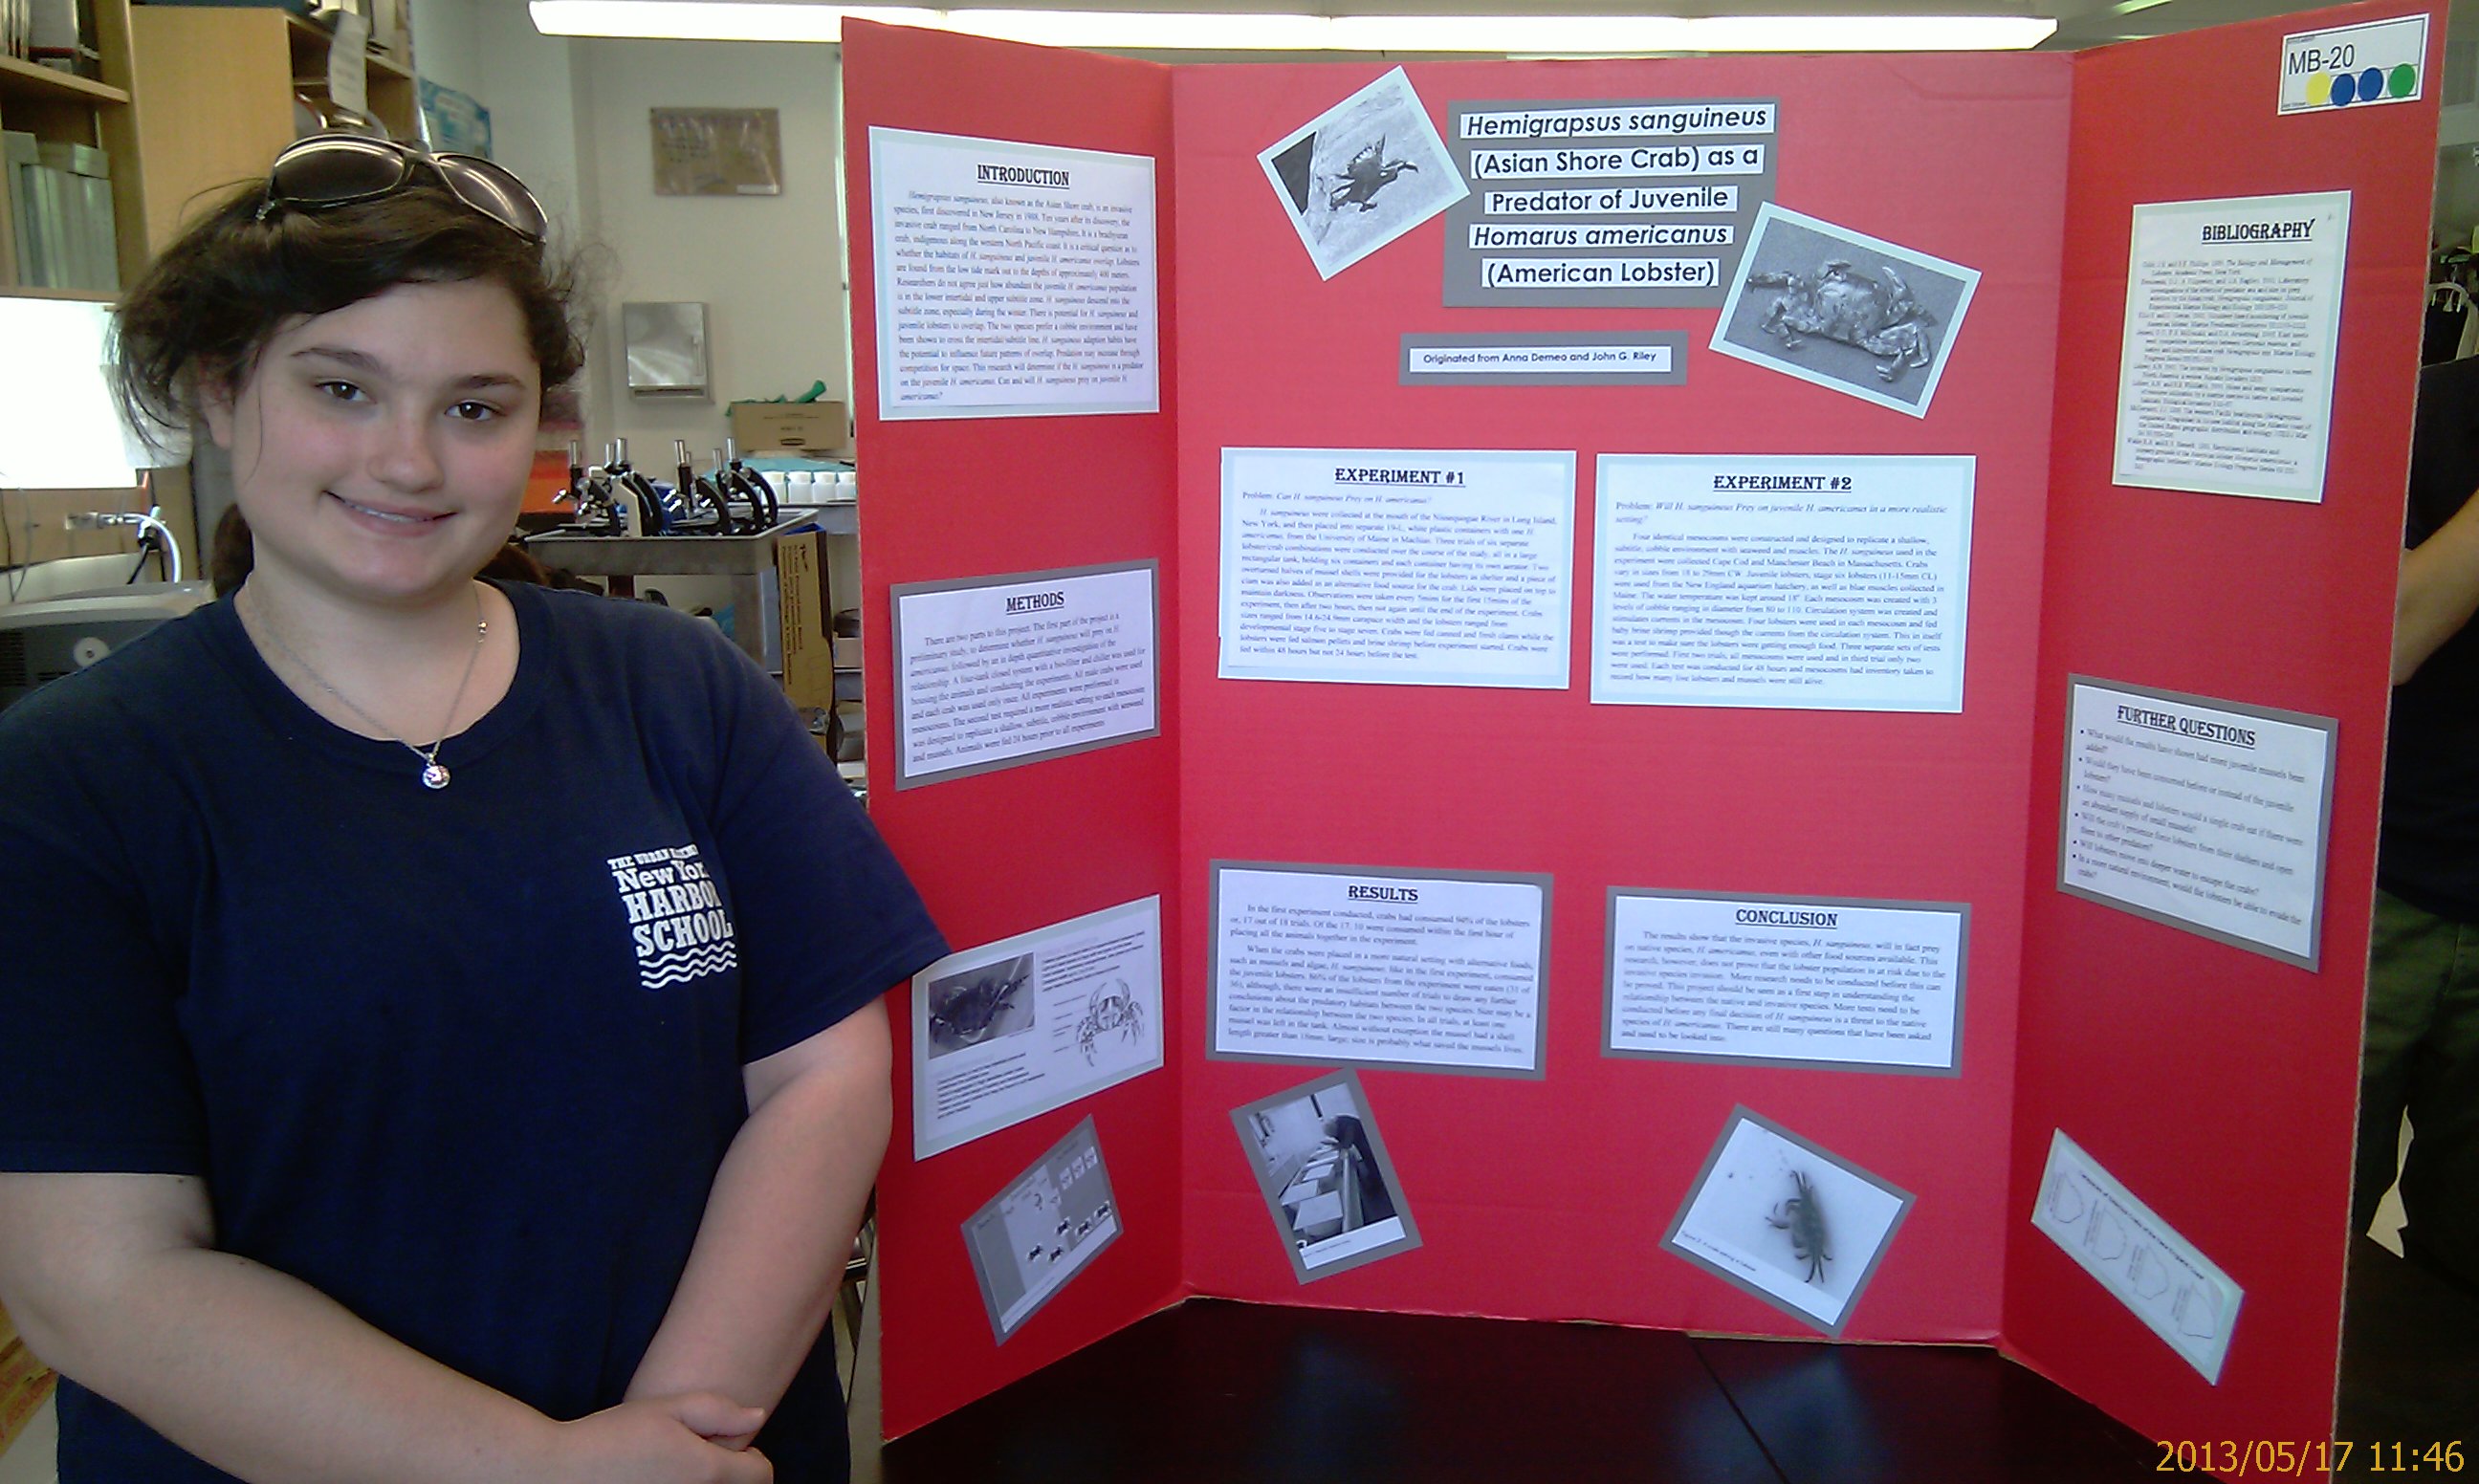 Rachel ready to answer the Hemigrapsus mystery